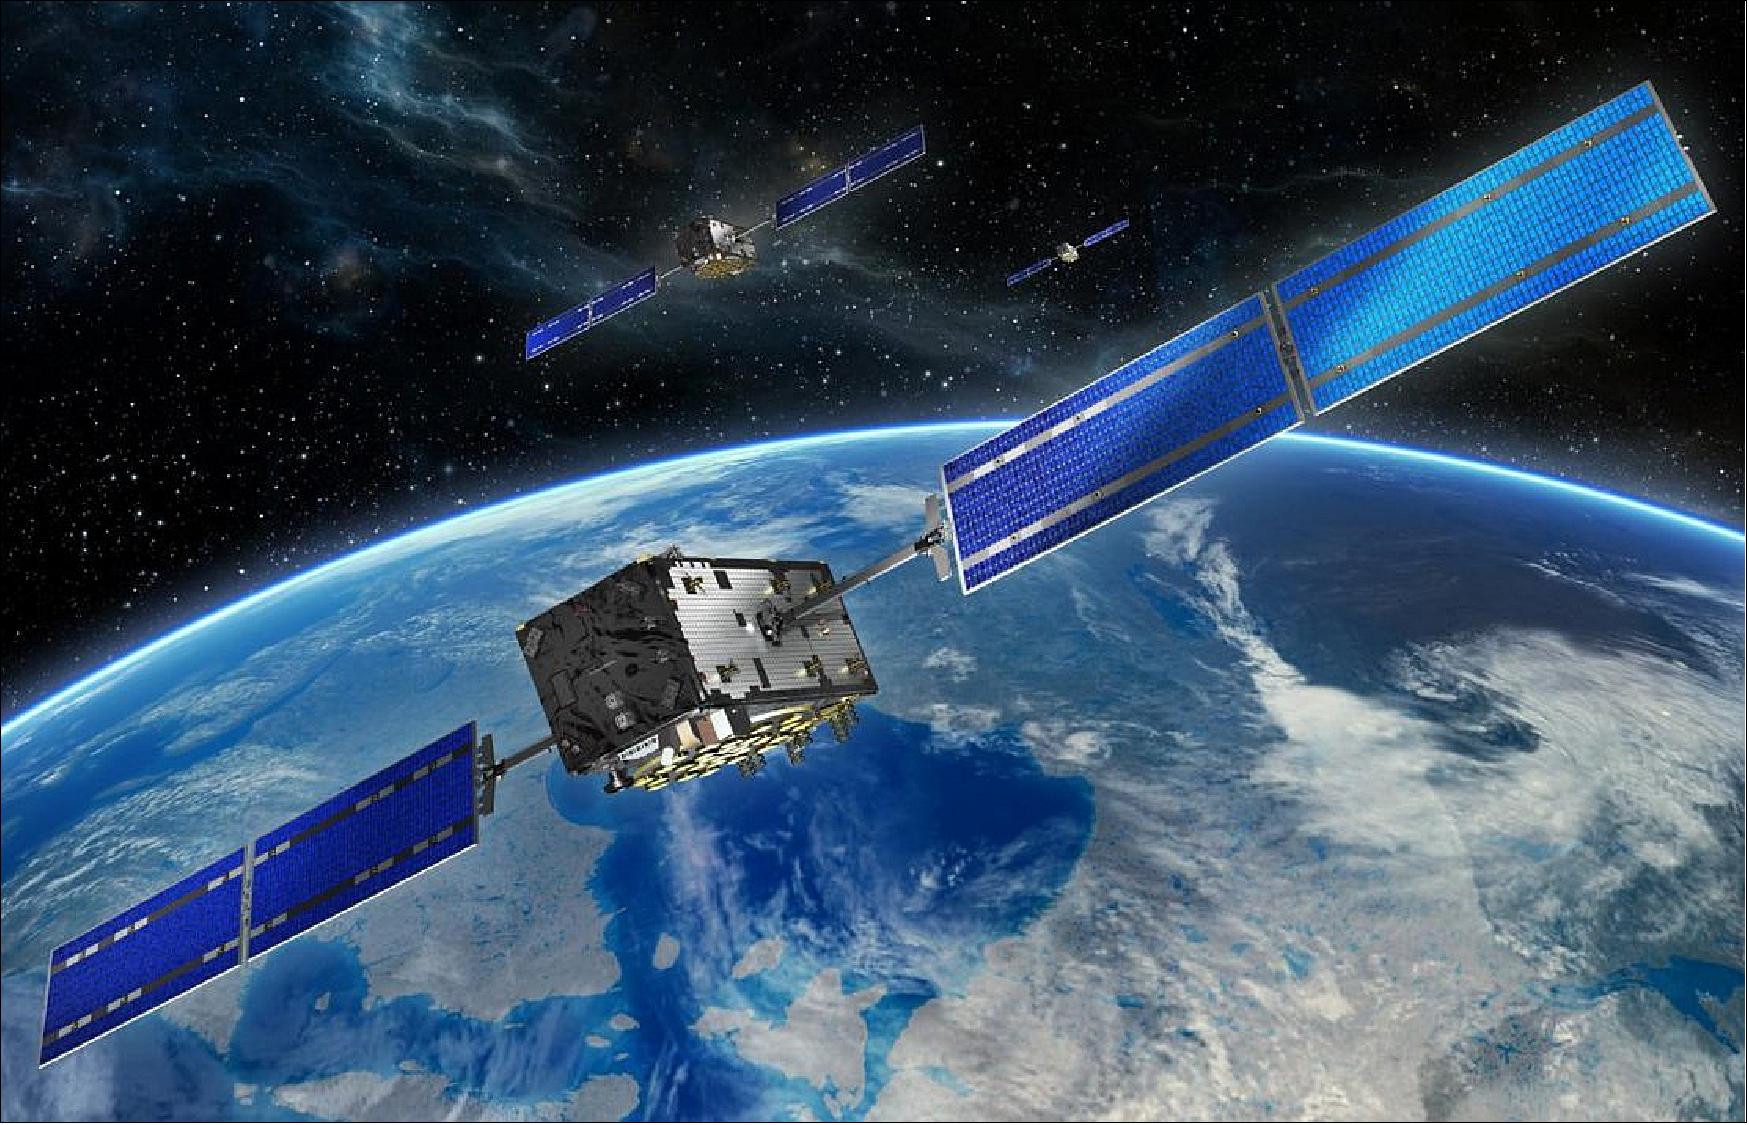 Figure 60: Europe's Galileo navigation satellites orbit 23 222 km above Earth to provide positioning, navigation and timing information all across the globe (image credit: GSA)